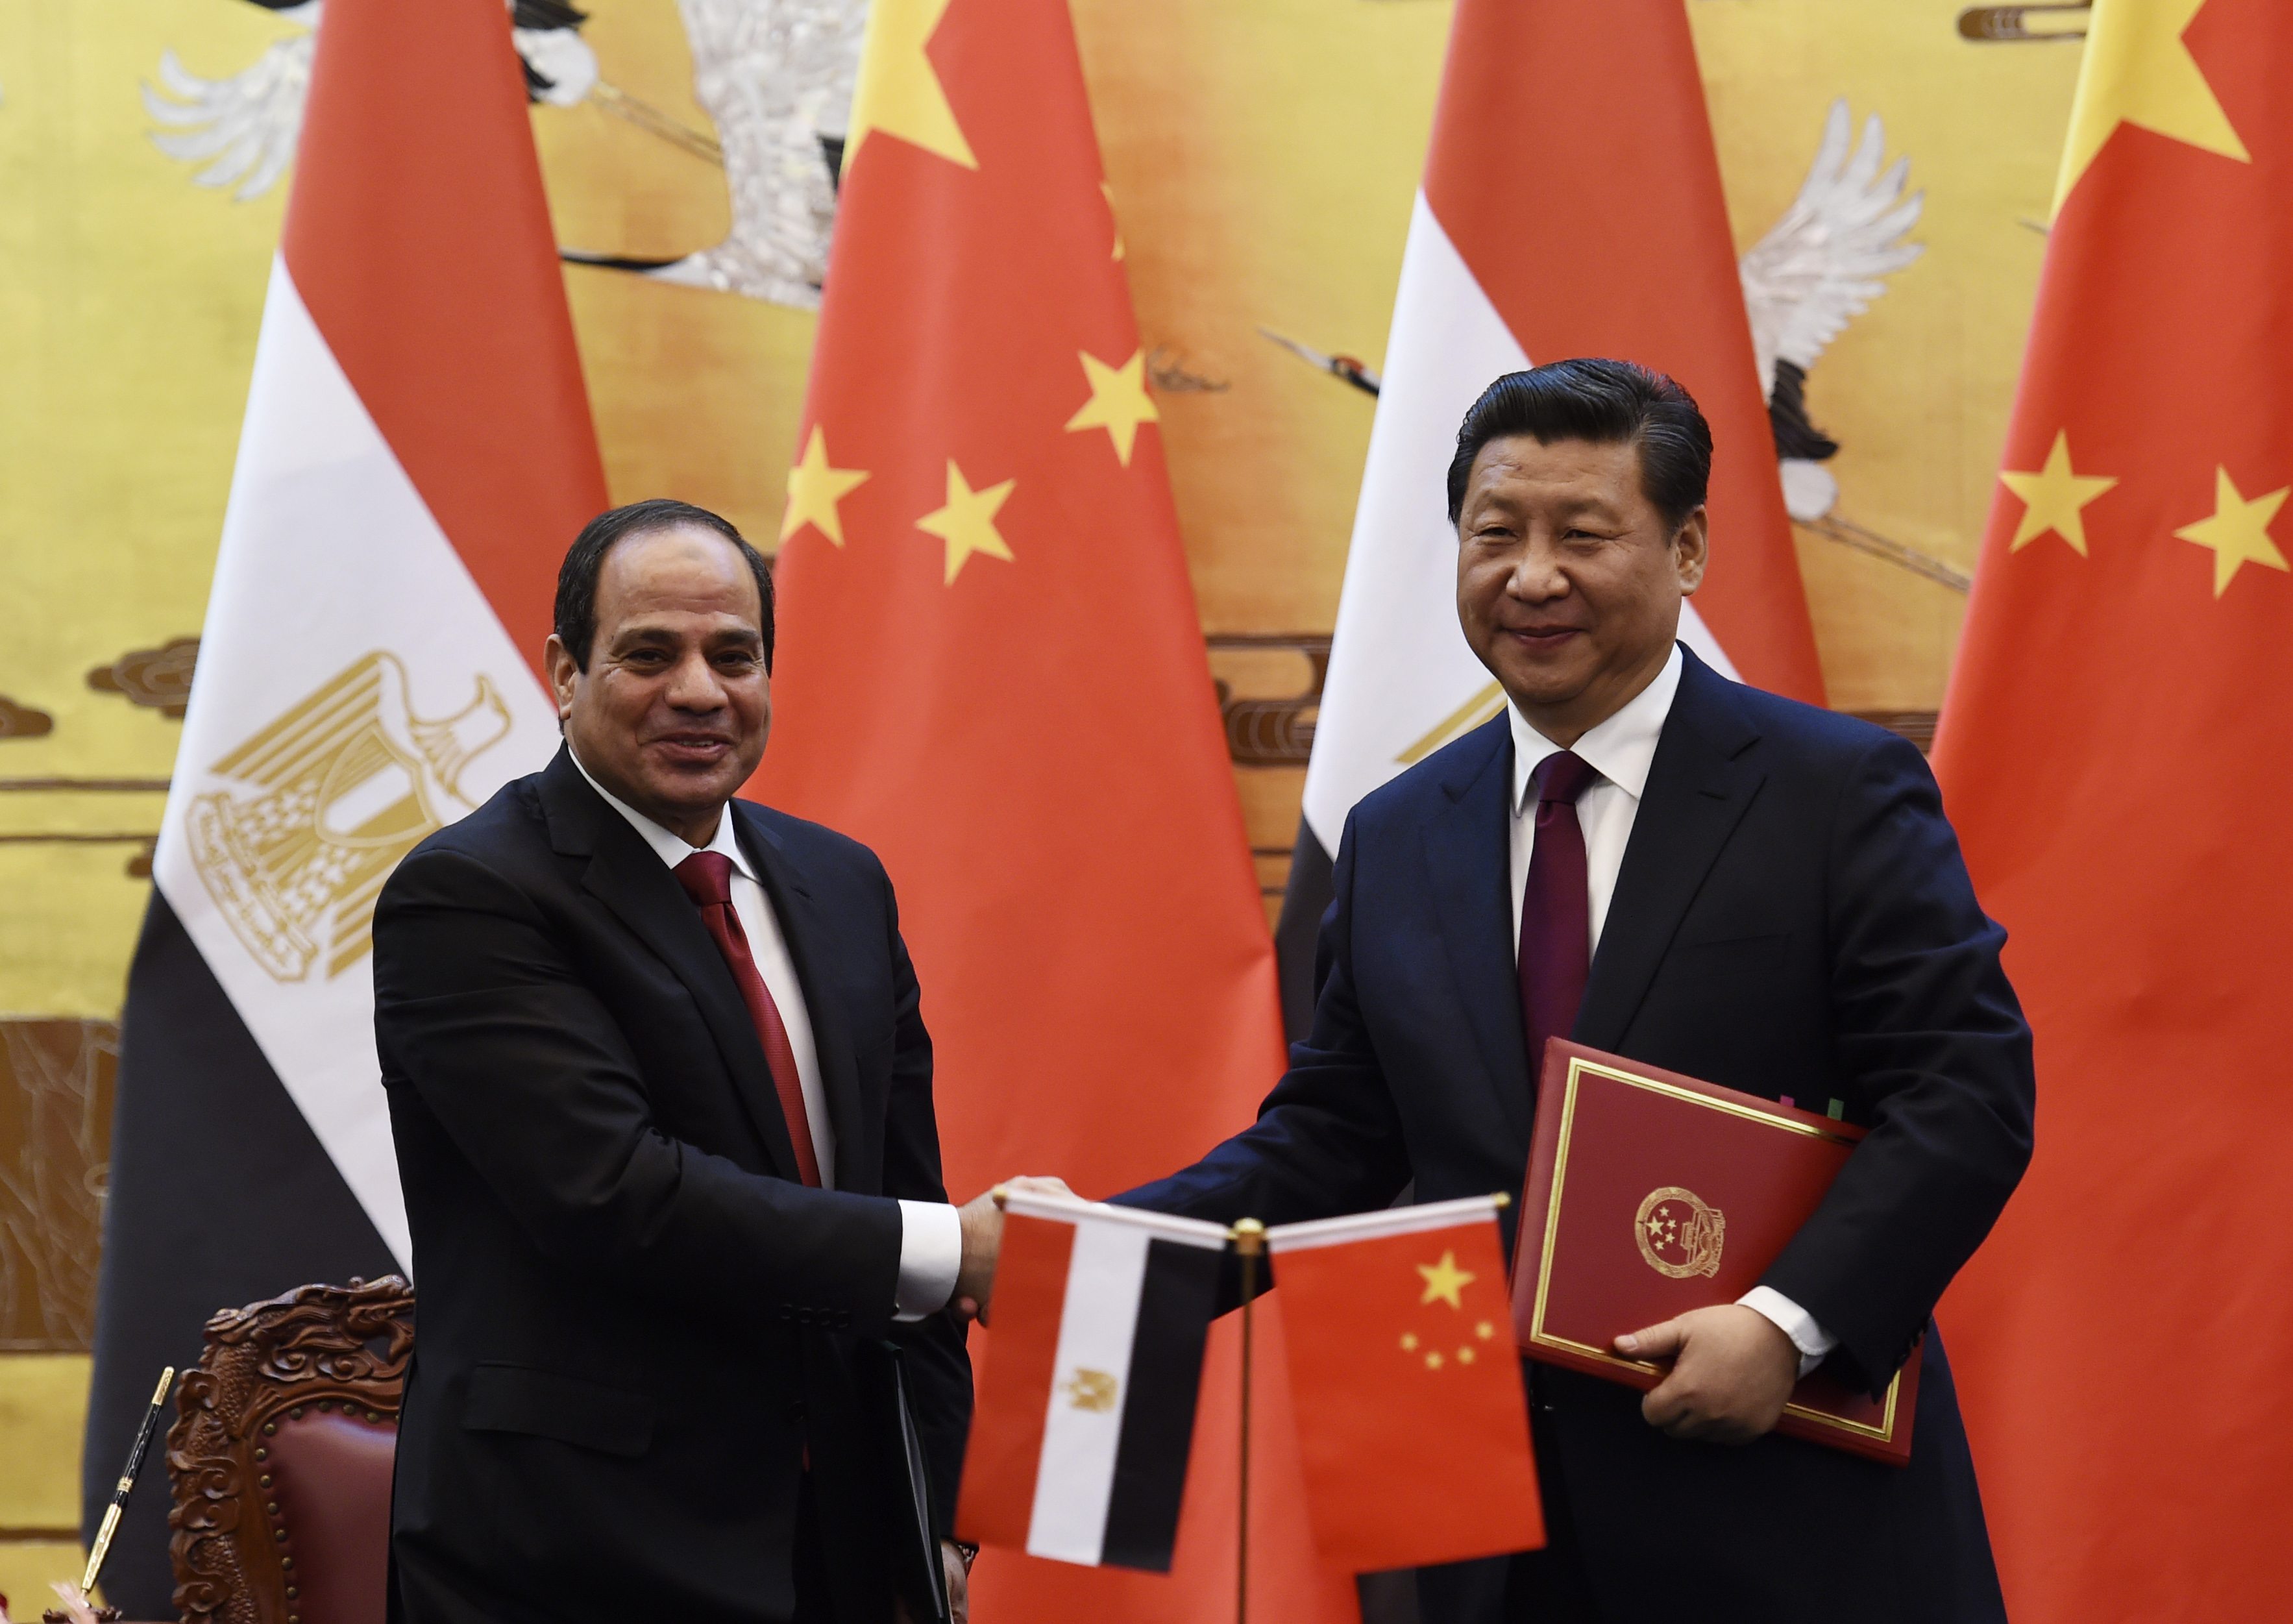 Sisi to embark on Asia tour on Sunday - state agency